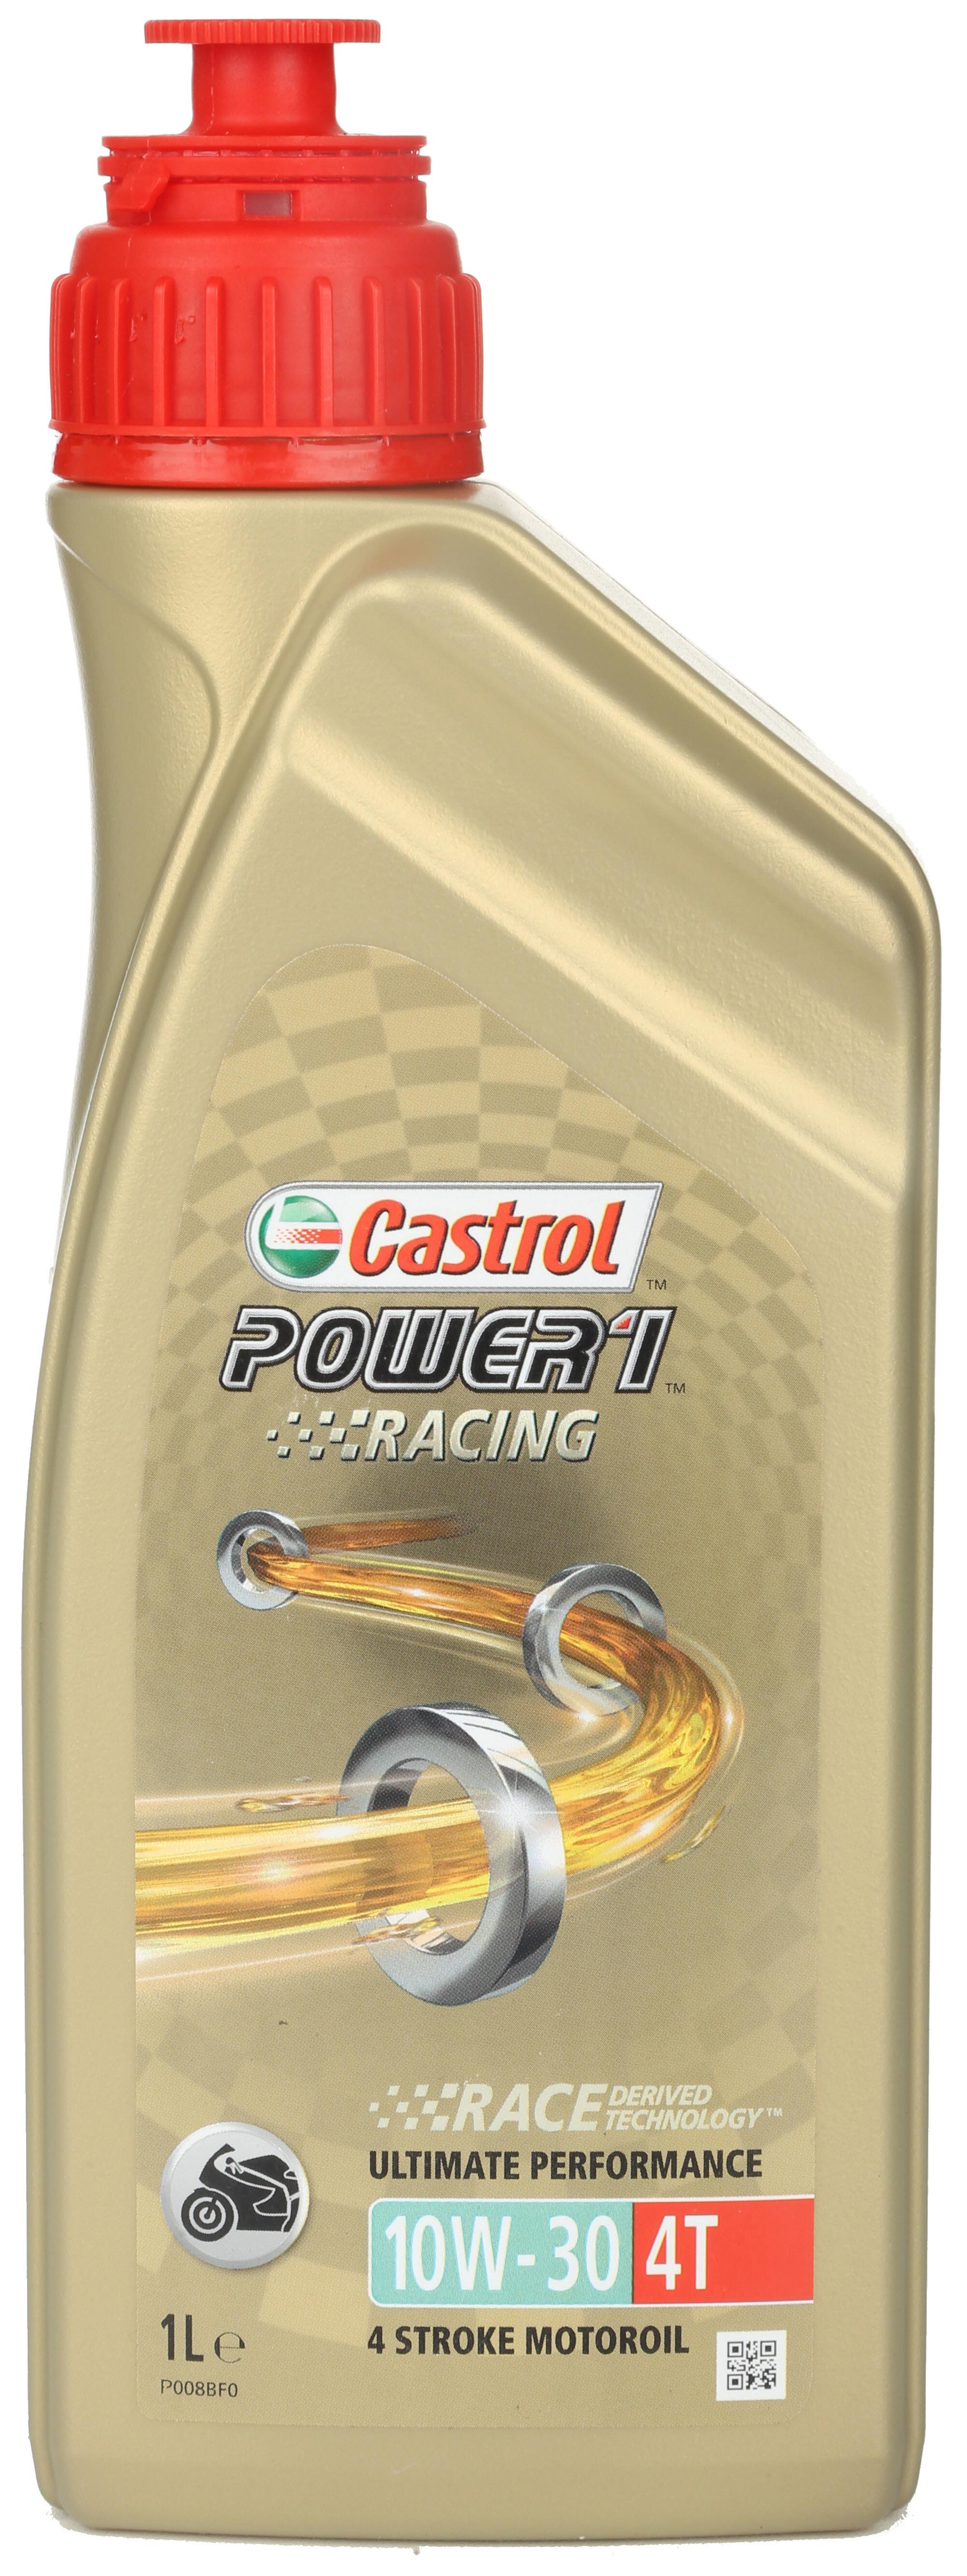 Castrol Power 1 Racing 4T 10W/30 Motorcycle Engine Oil - 1Ltr